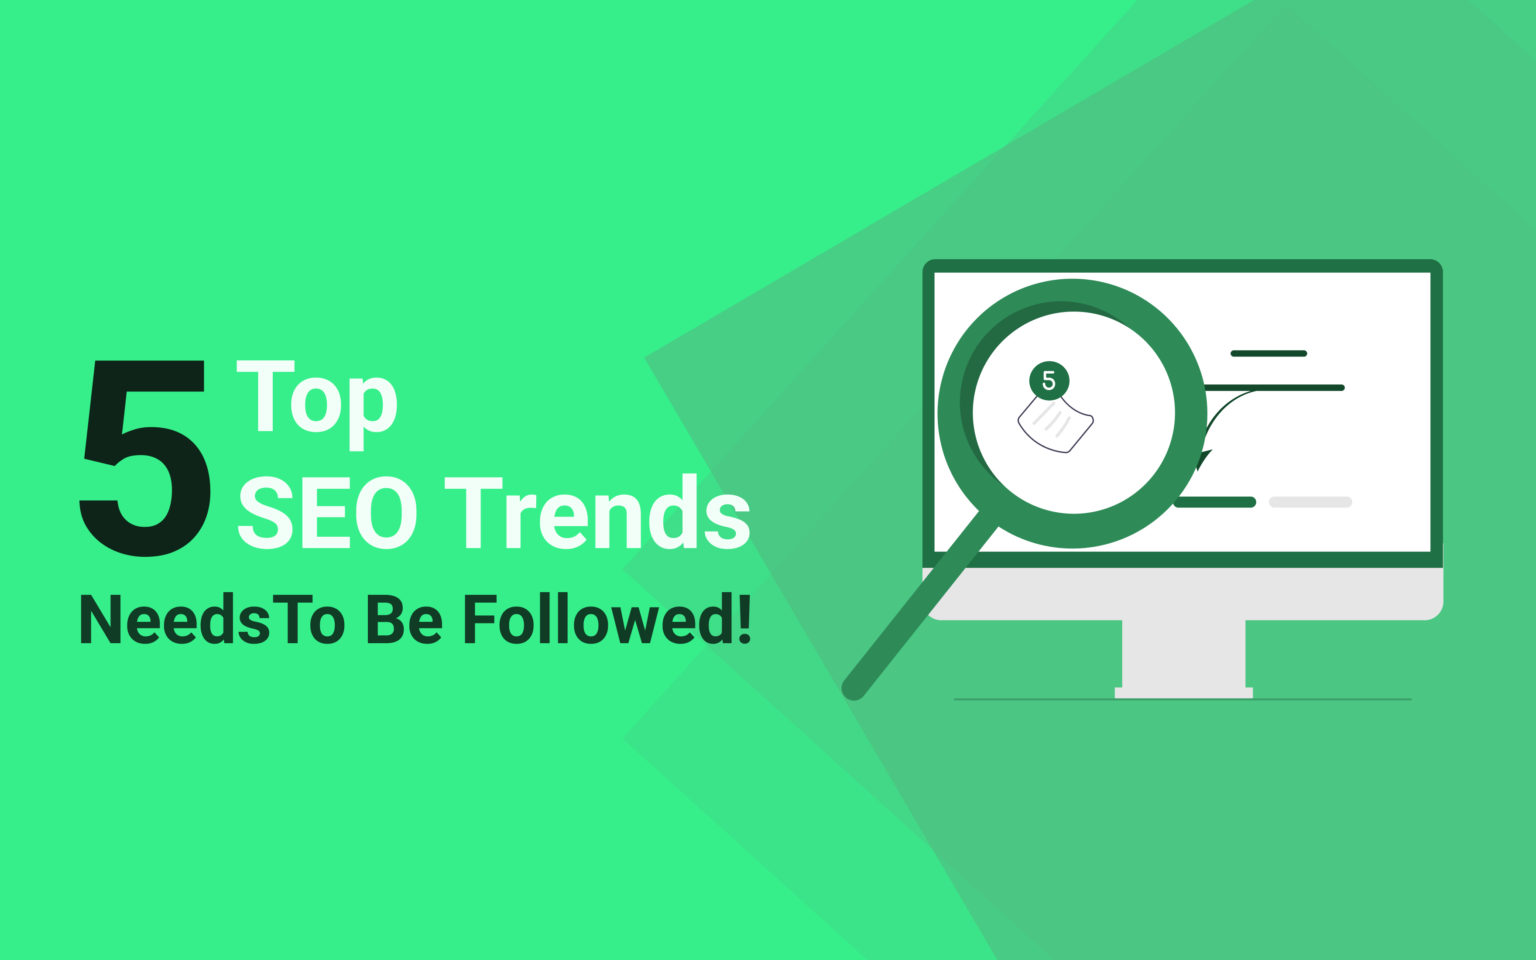 Top 5 SEO Trends You Need To Be Following » W3Layouts